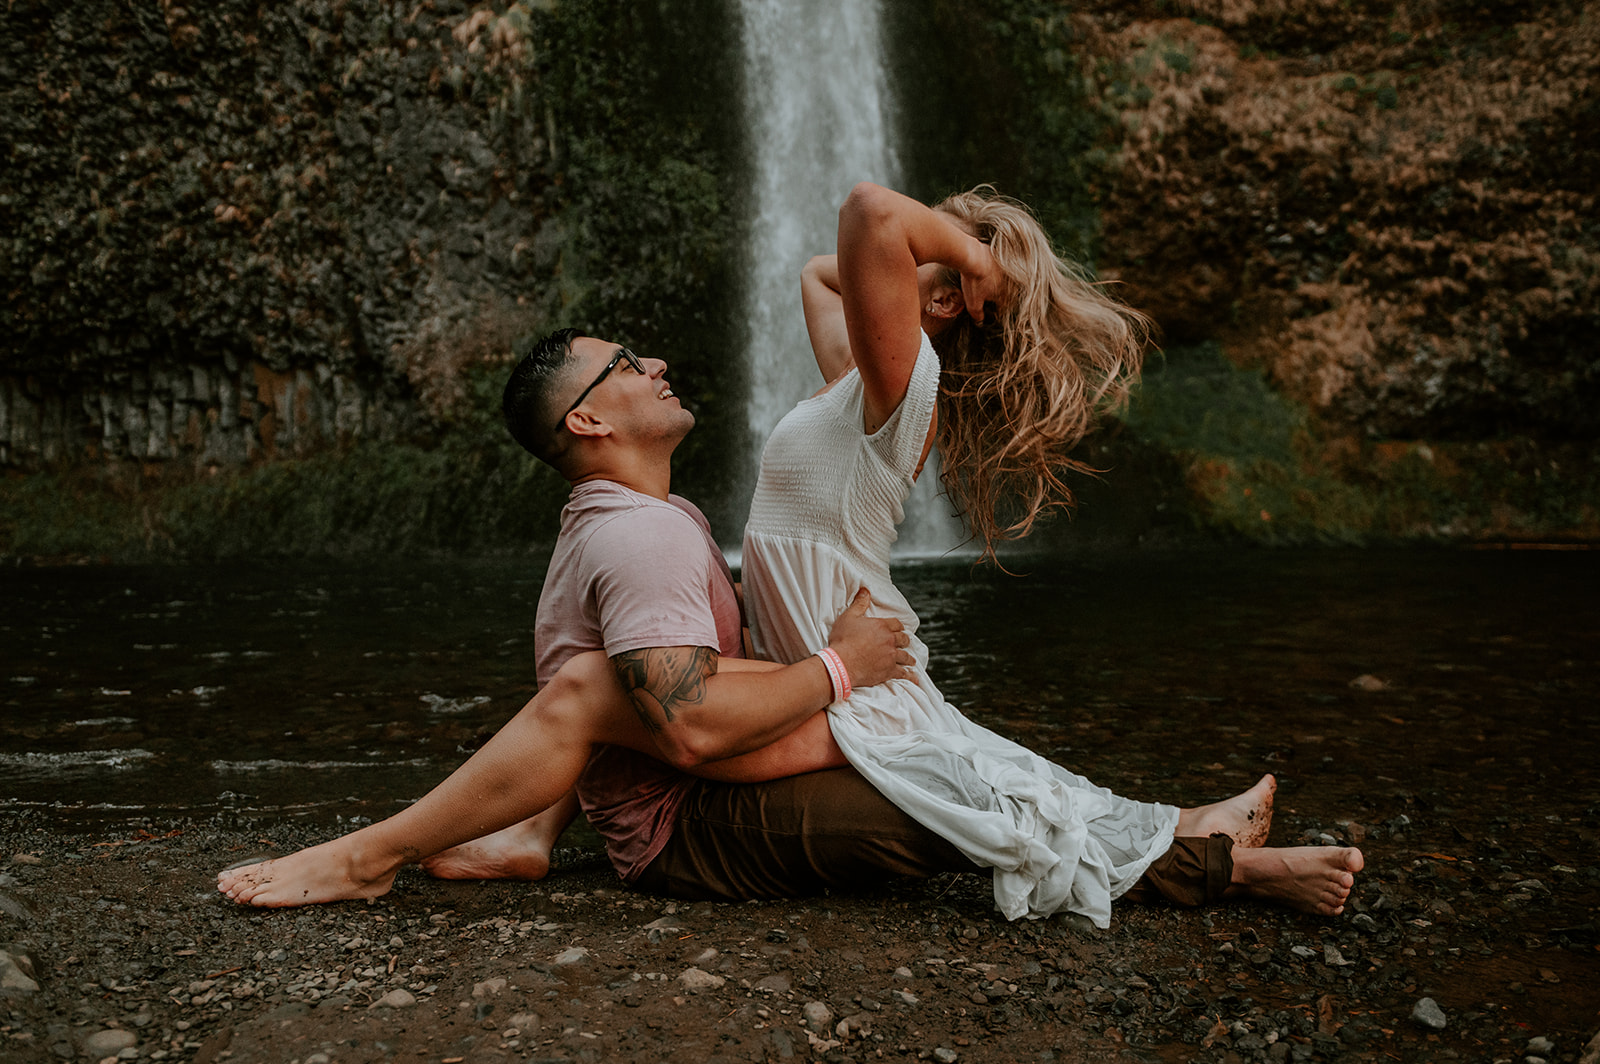 Couple playing at the base of horsetail falls. Girl is start telling the guy and playing with her hair